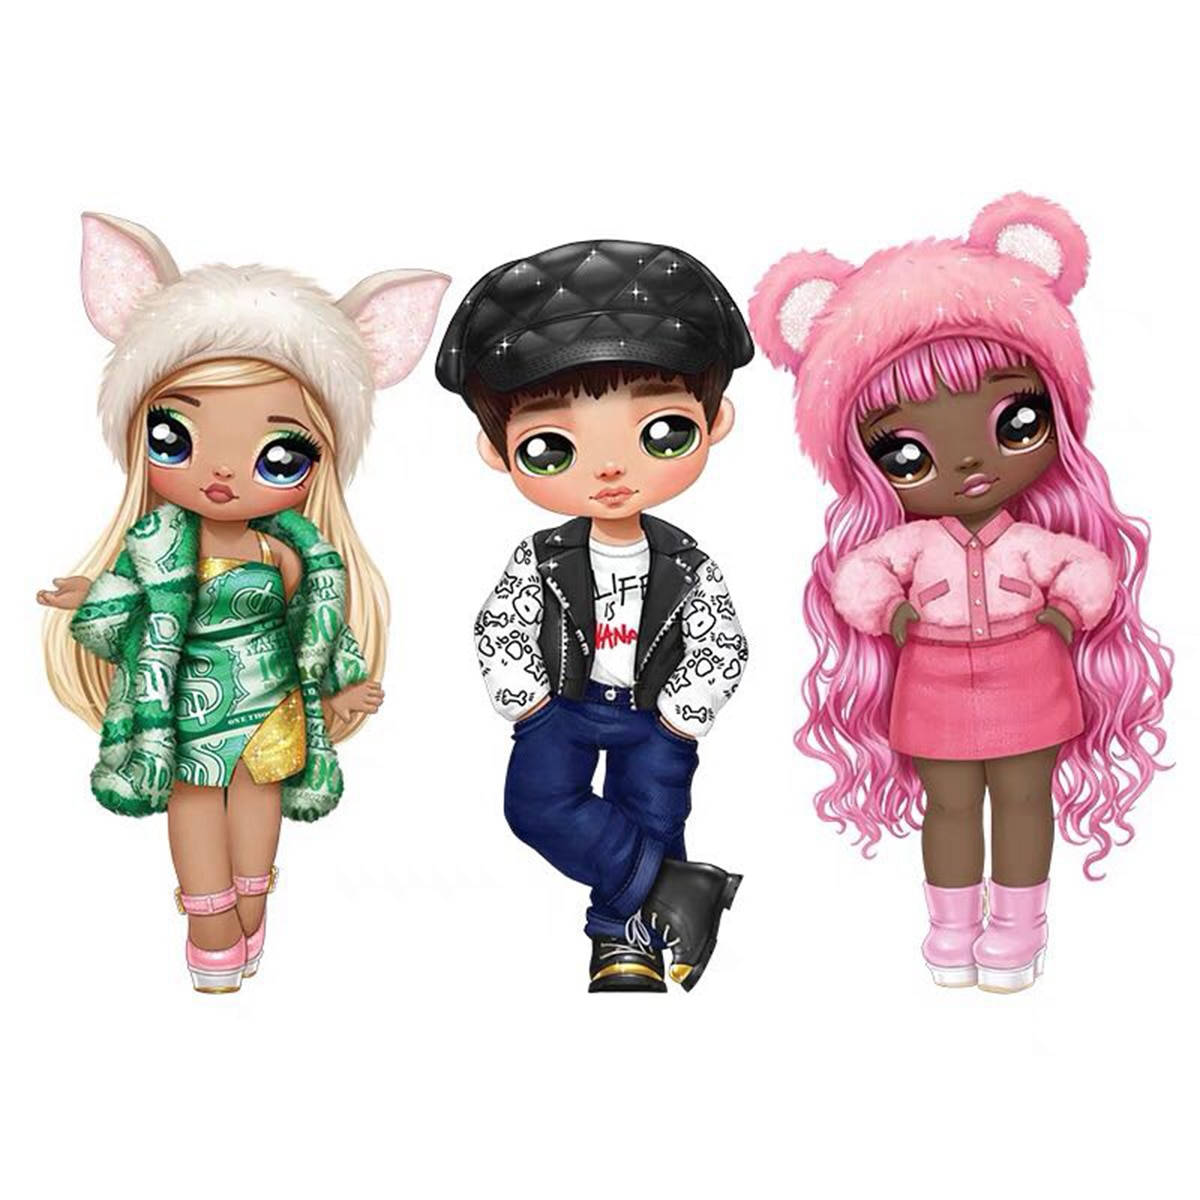 Three Cartoon Dolls With Different Outfits Background